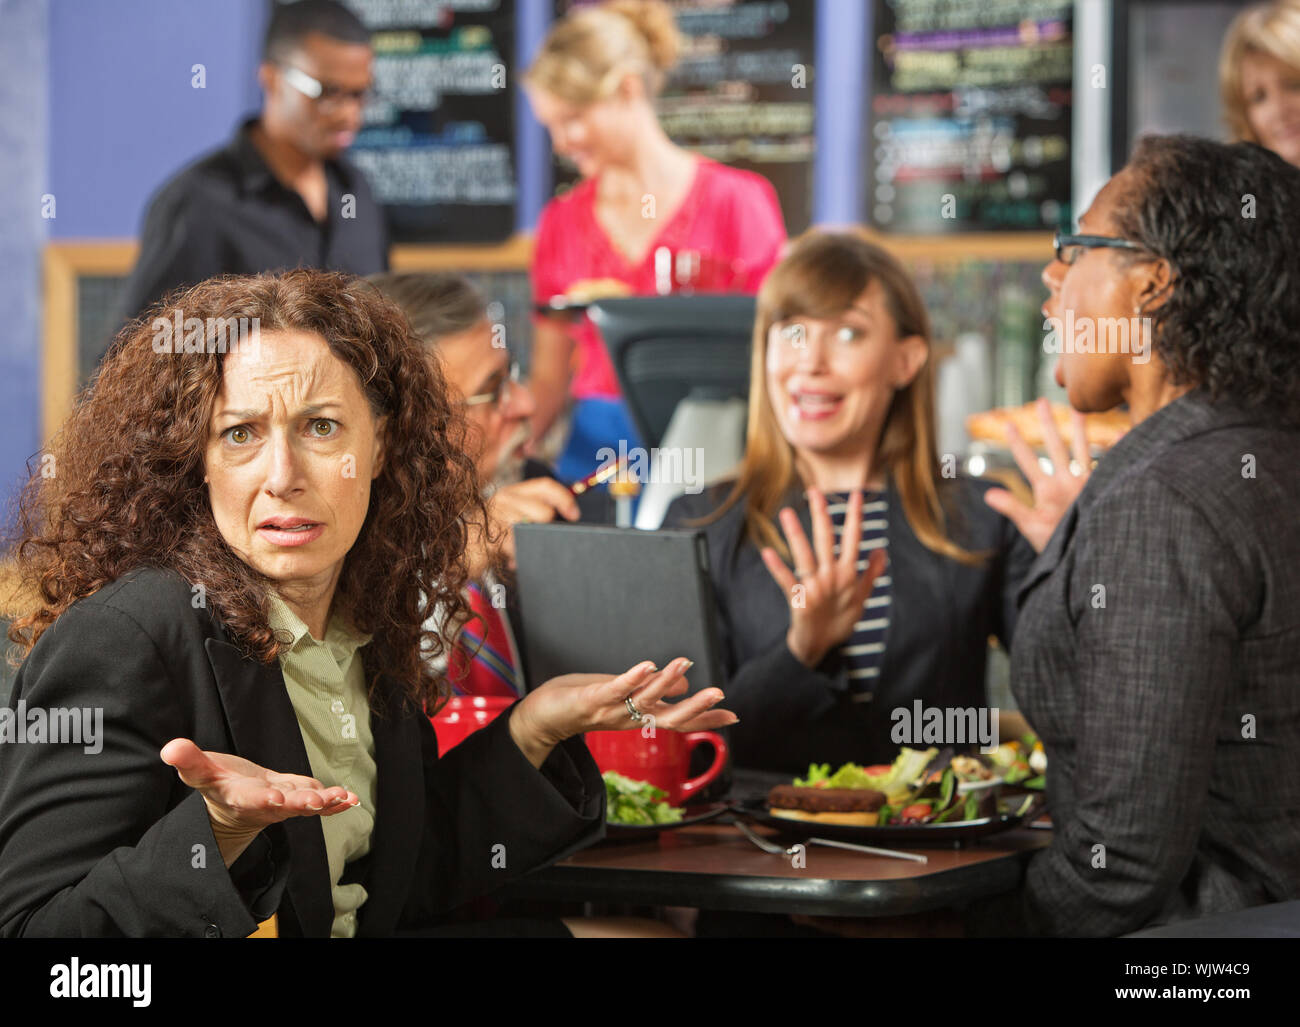 Irritated business woman with coworkers in cafeteria Stock Photo